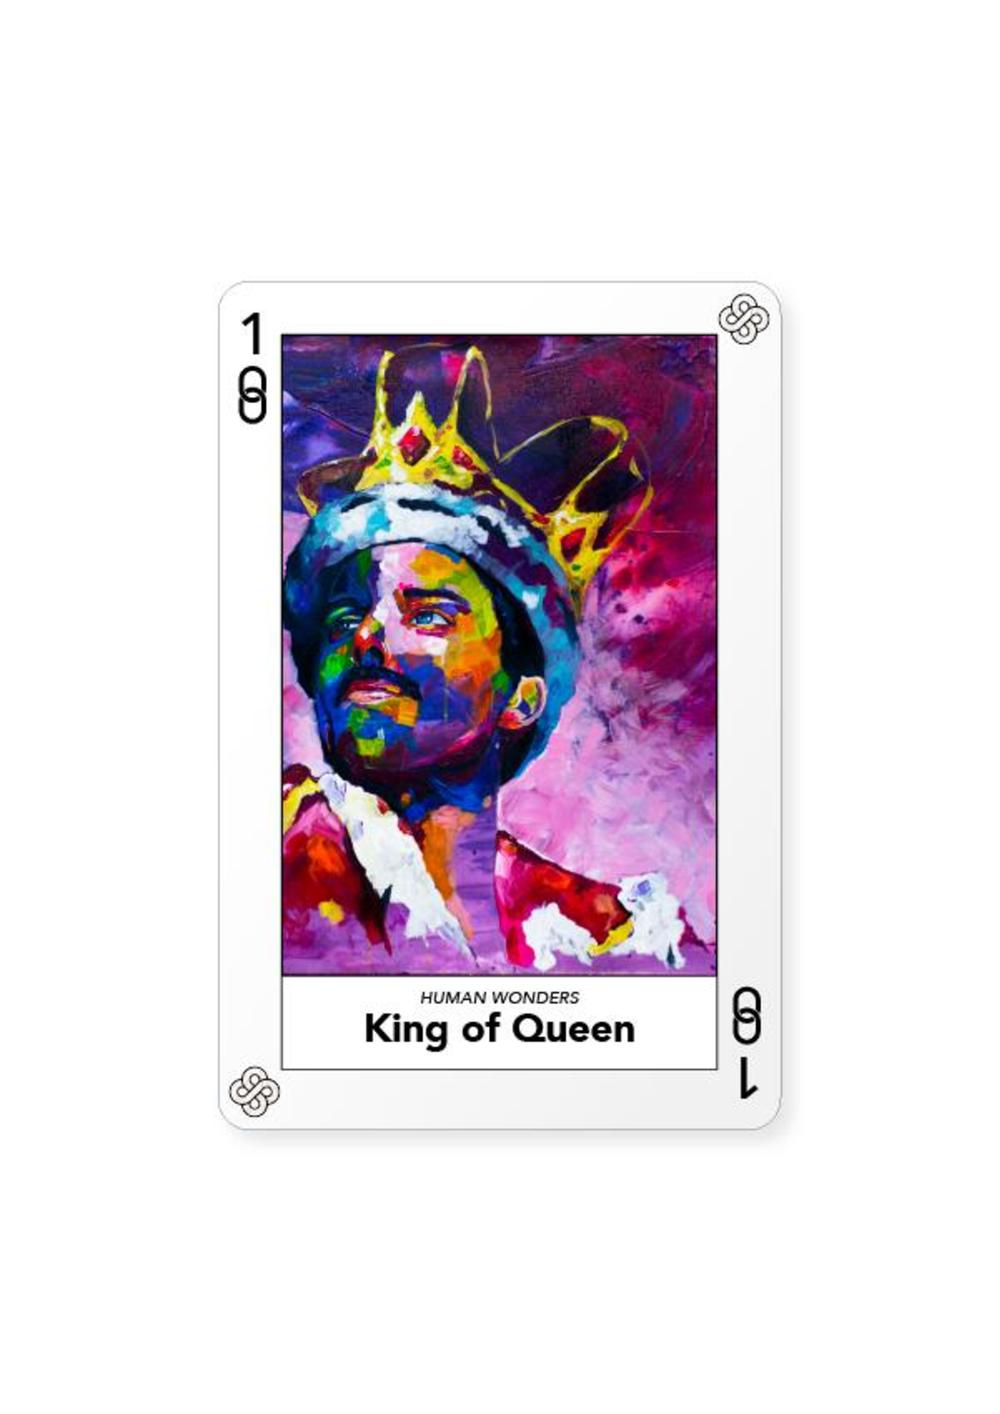 Certificate of Authenticity and Consignment - King of Queen